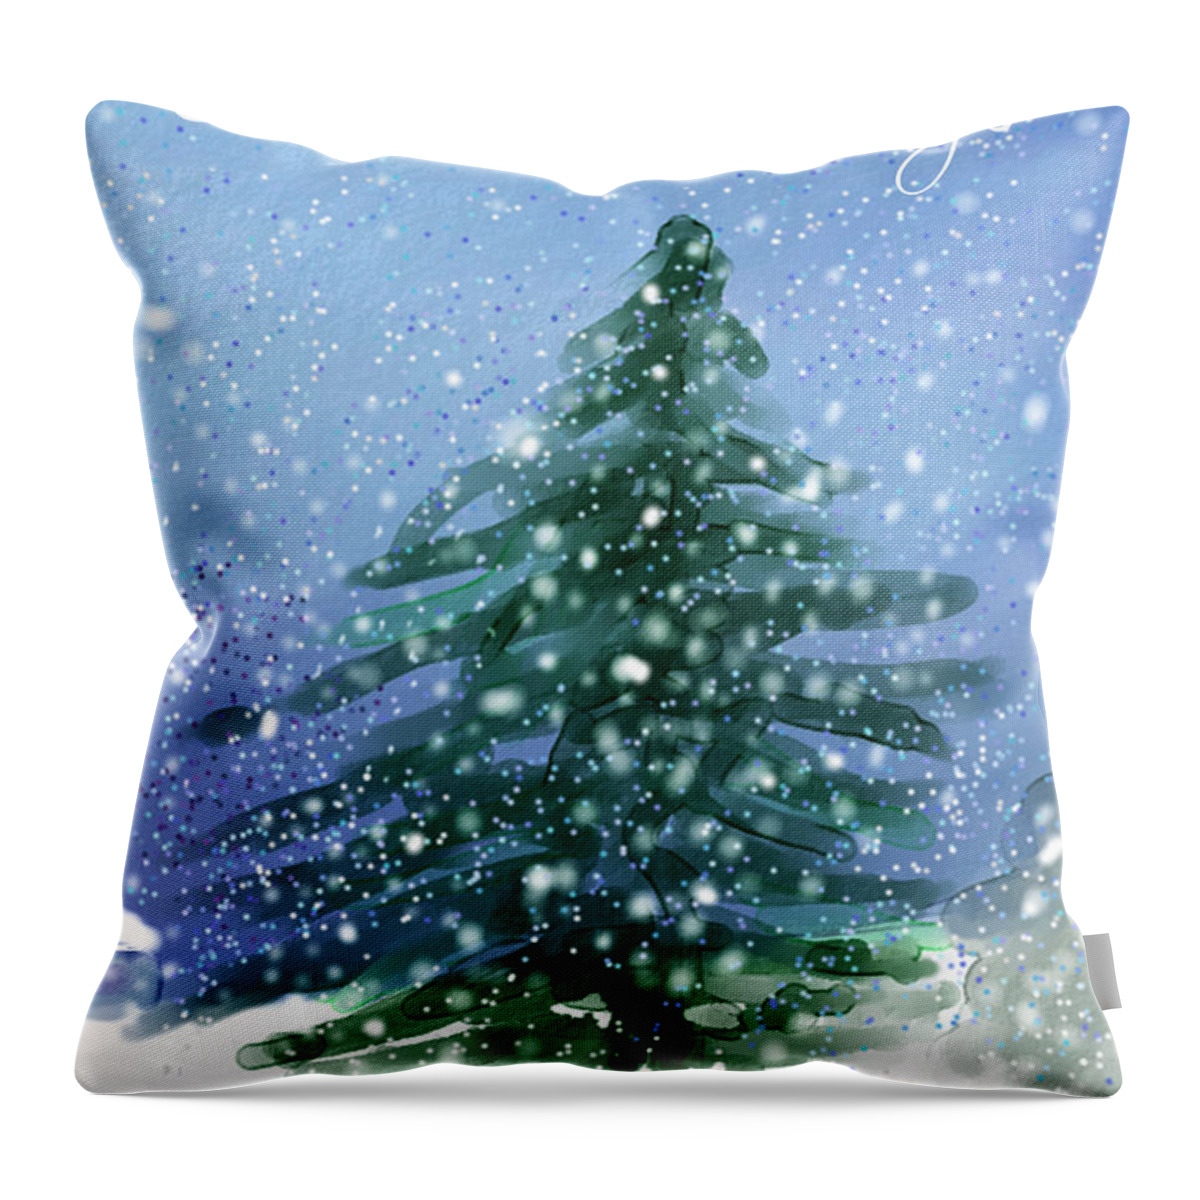 Christmas Throw Pillow featuring the digital art Christmas Tree In The Snow by Arline Wagner